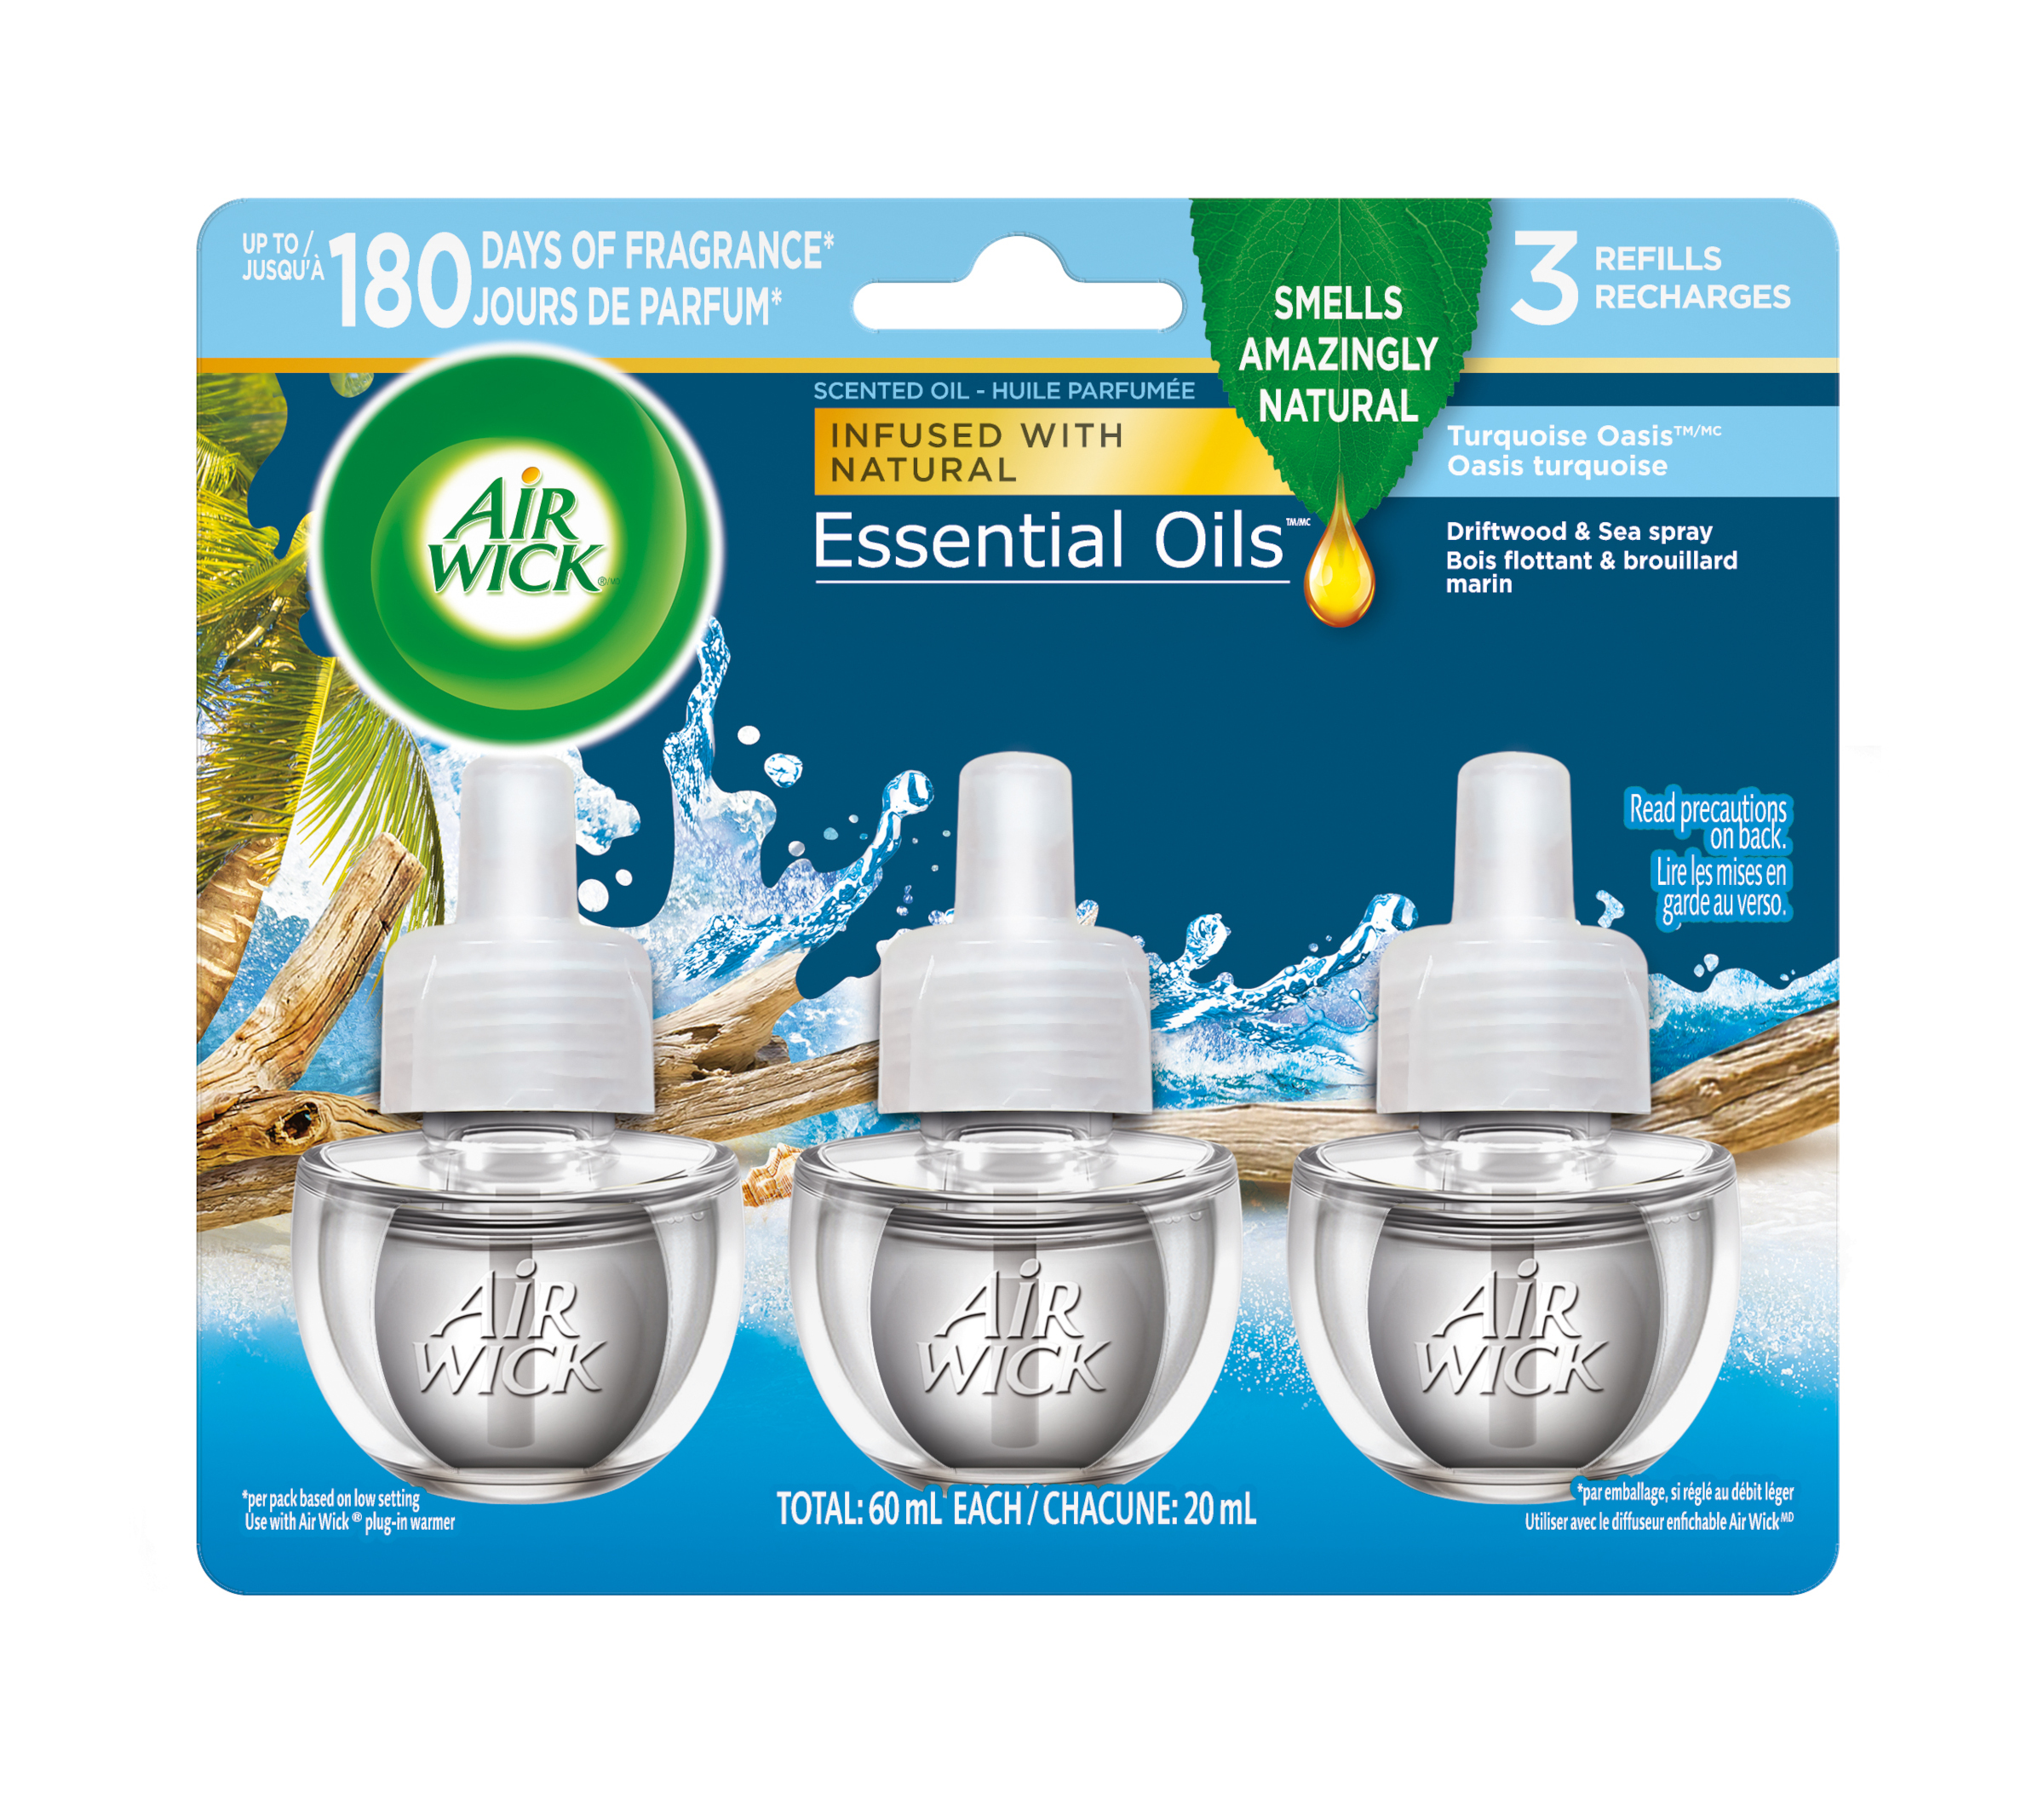 AIR WICK® Scented Oil - Turquoise Oasis (Canada)